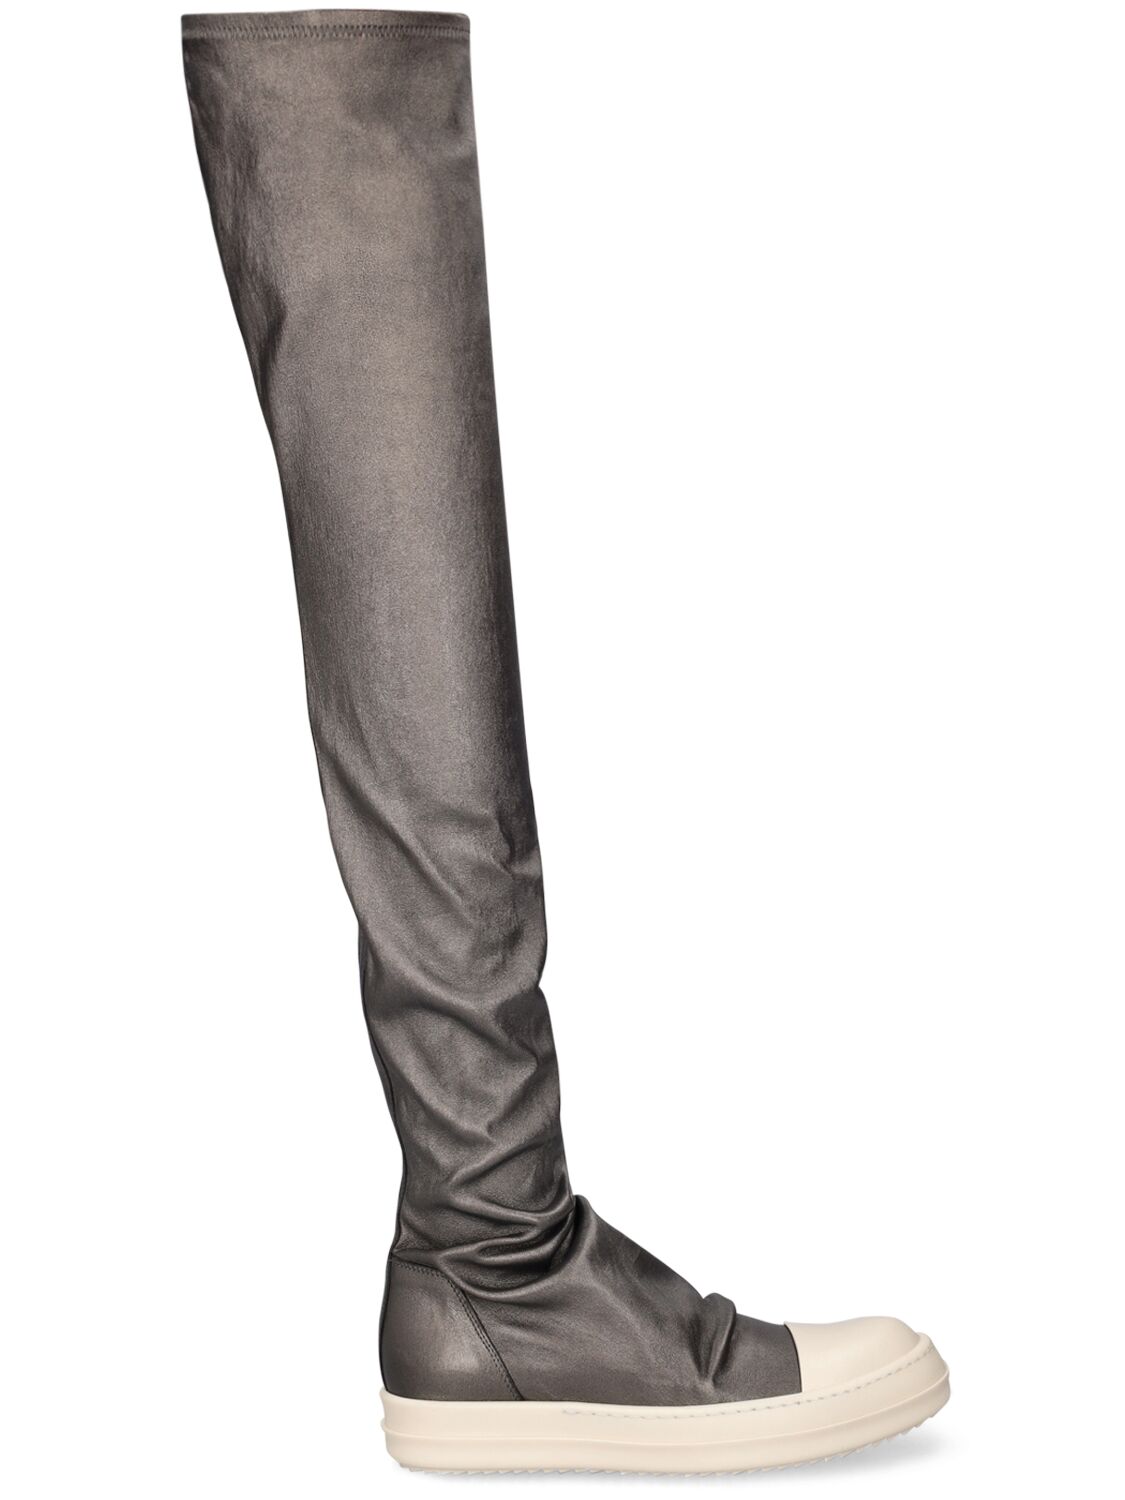 Image of Mega Bumper Stretch Leather Boots